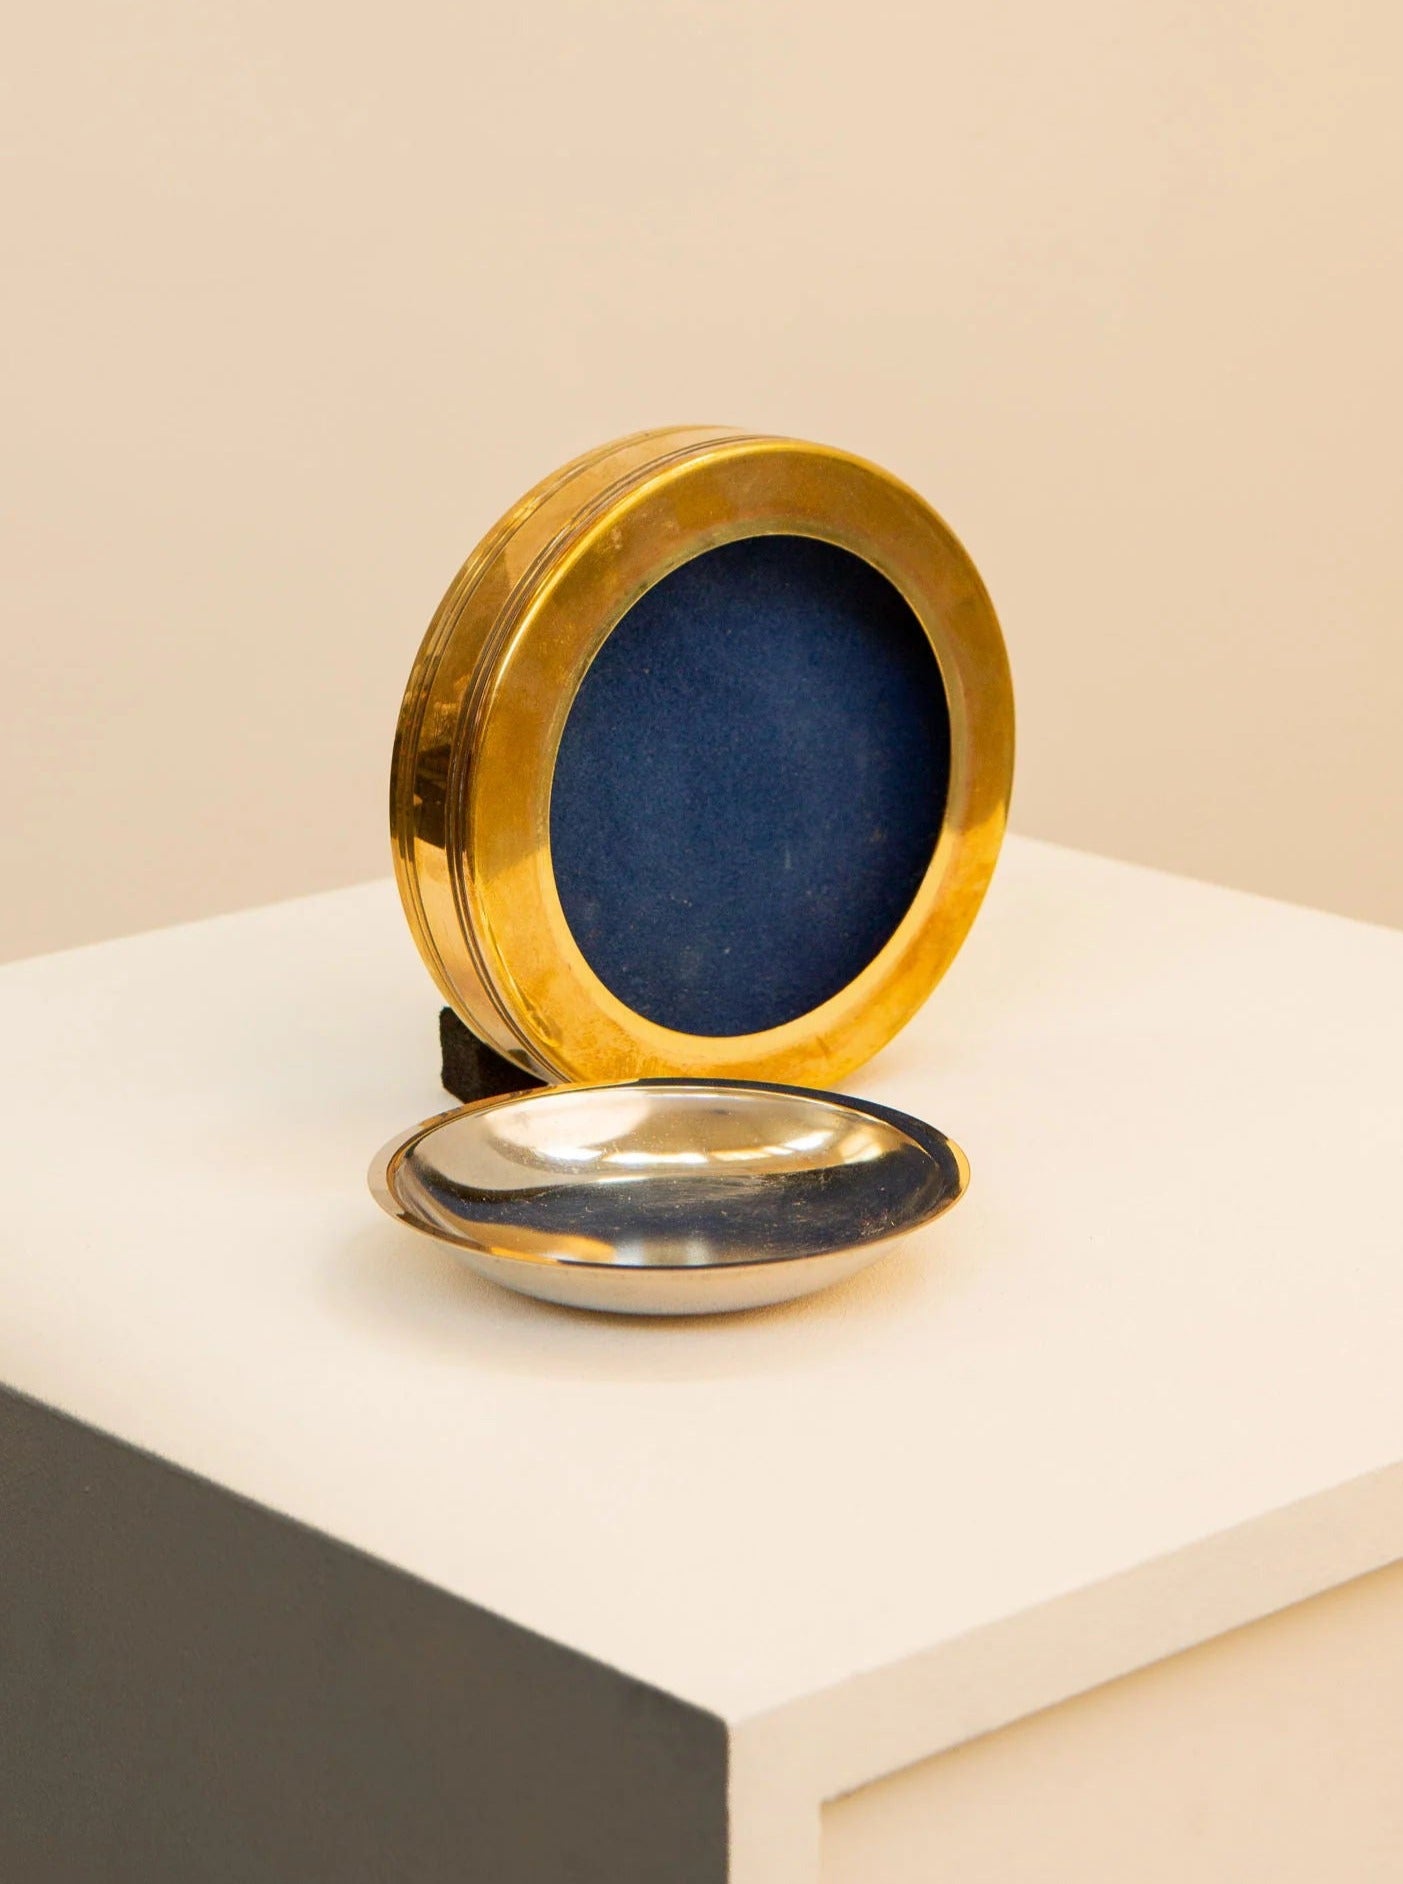 Circular Silver-Plated Metal and 60's Brass Vide Poche